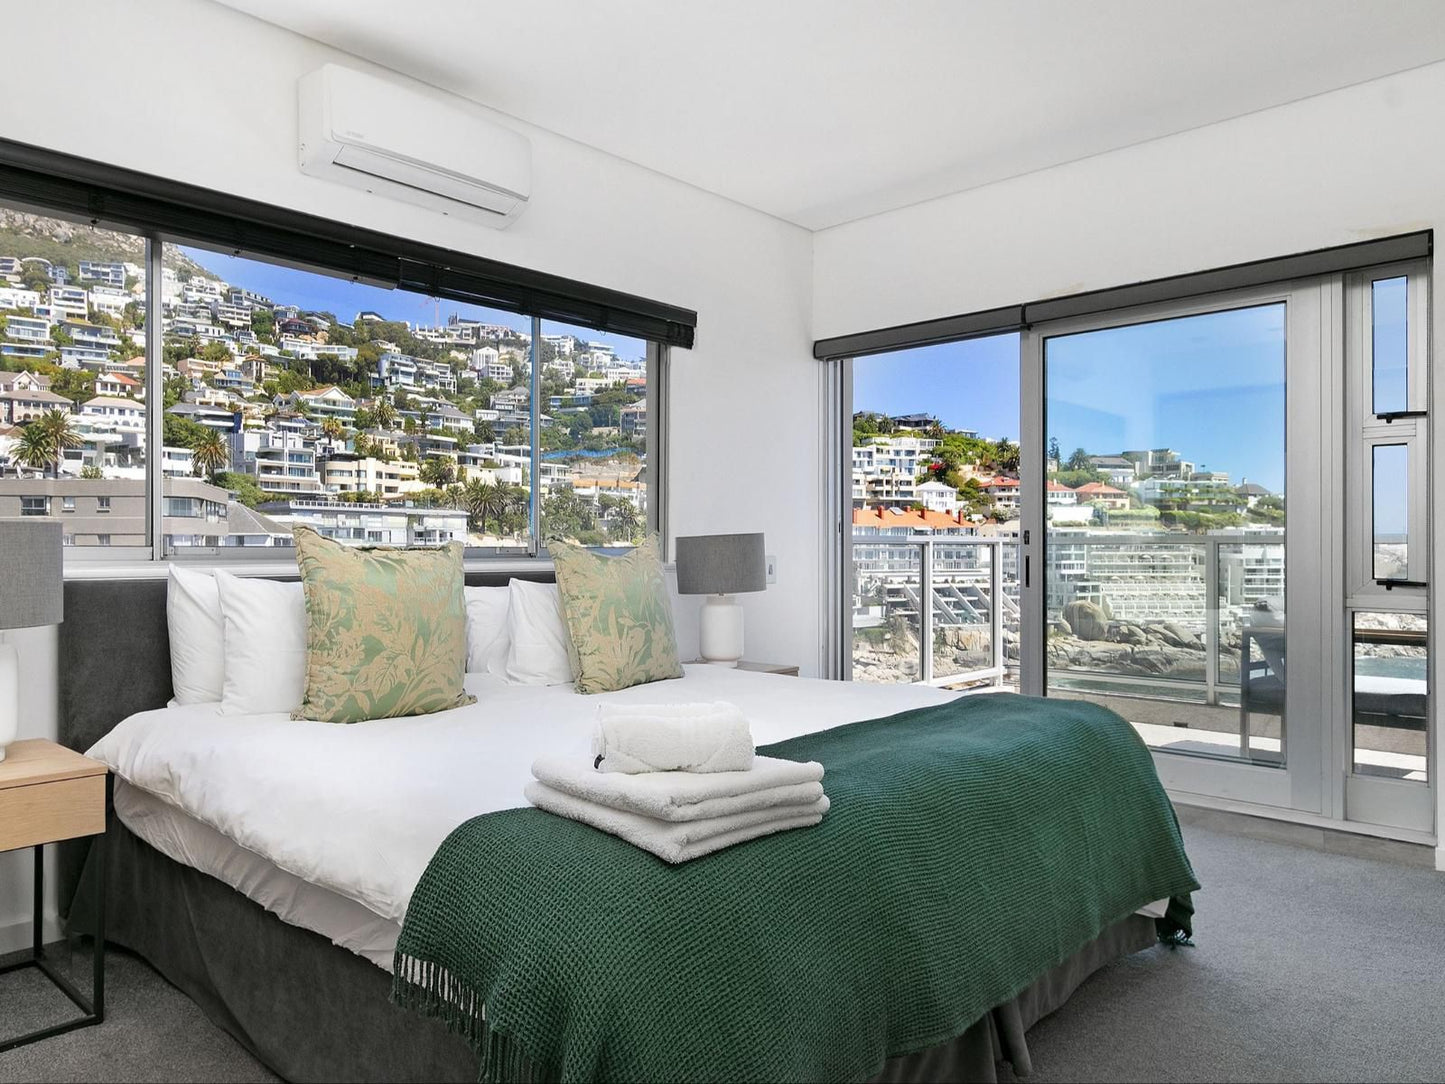 Seacliffe 502 By Hostagents Bantry Bay Cape Town Western Cape South Africa Unsaturated, Bedroom